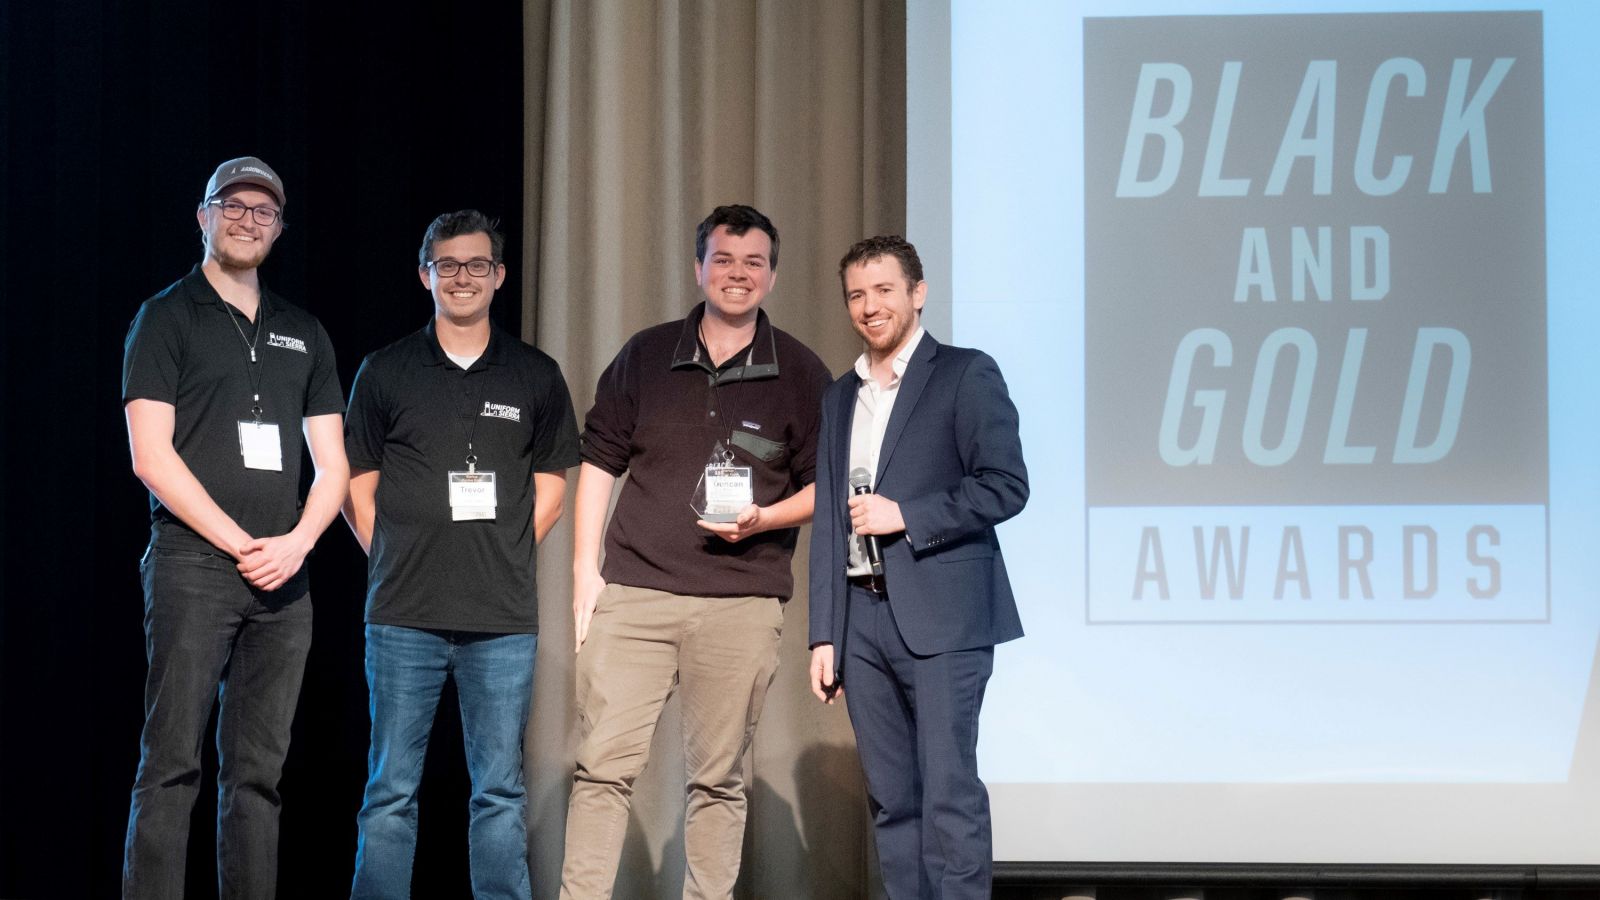 Uniform Sierra Aerospace participated in the biannual Black and Gold Awards pitch competition. Purdue Innovates Startup Foundry, led by Tyler Mantel (far right), awarded $100,000 to the company founded by Jeremy Fredrick (far left), Trevor Redpath (center left) and Duncan Mulgrew (center right). (Photo credit: Vincent Walter)